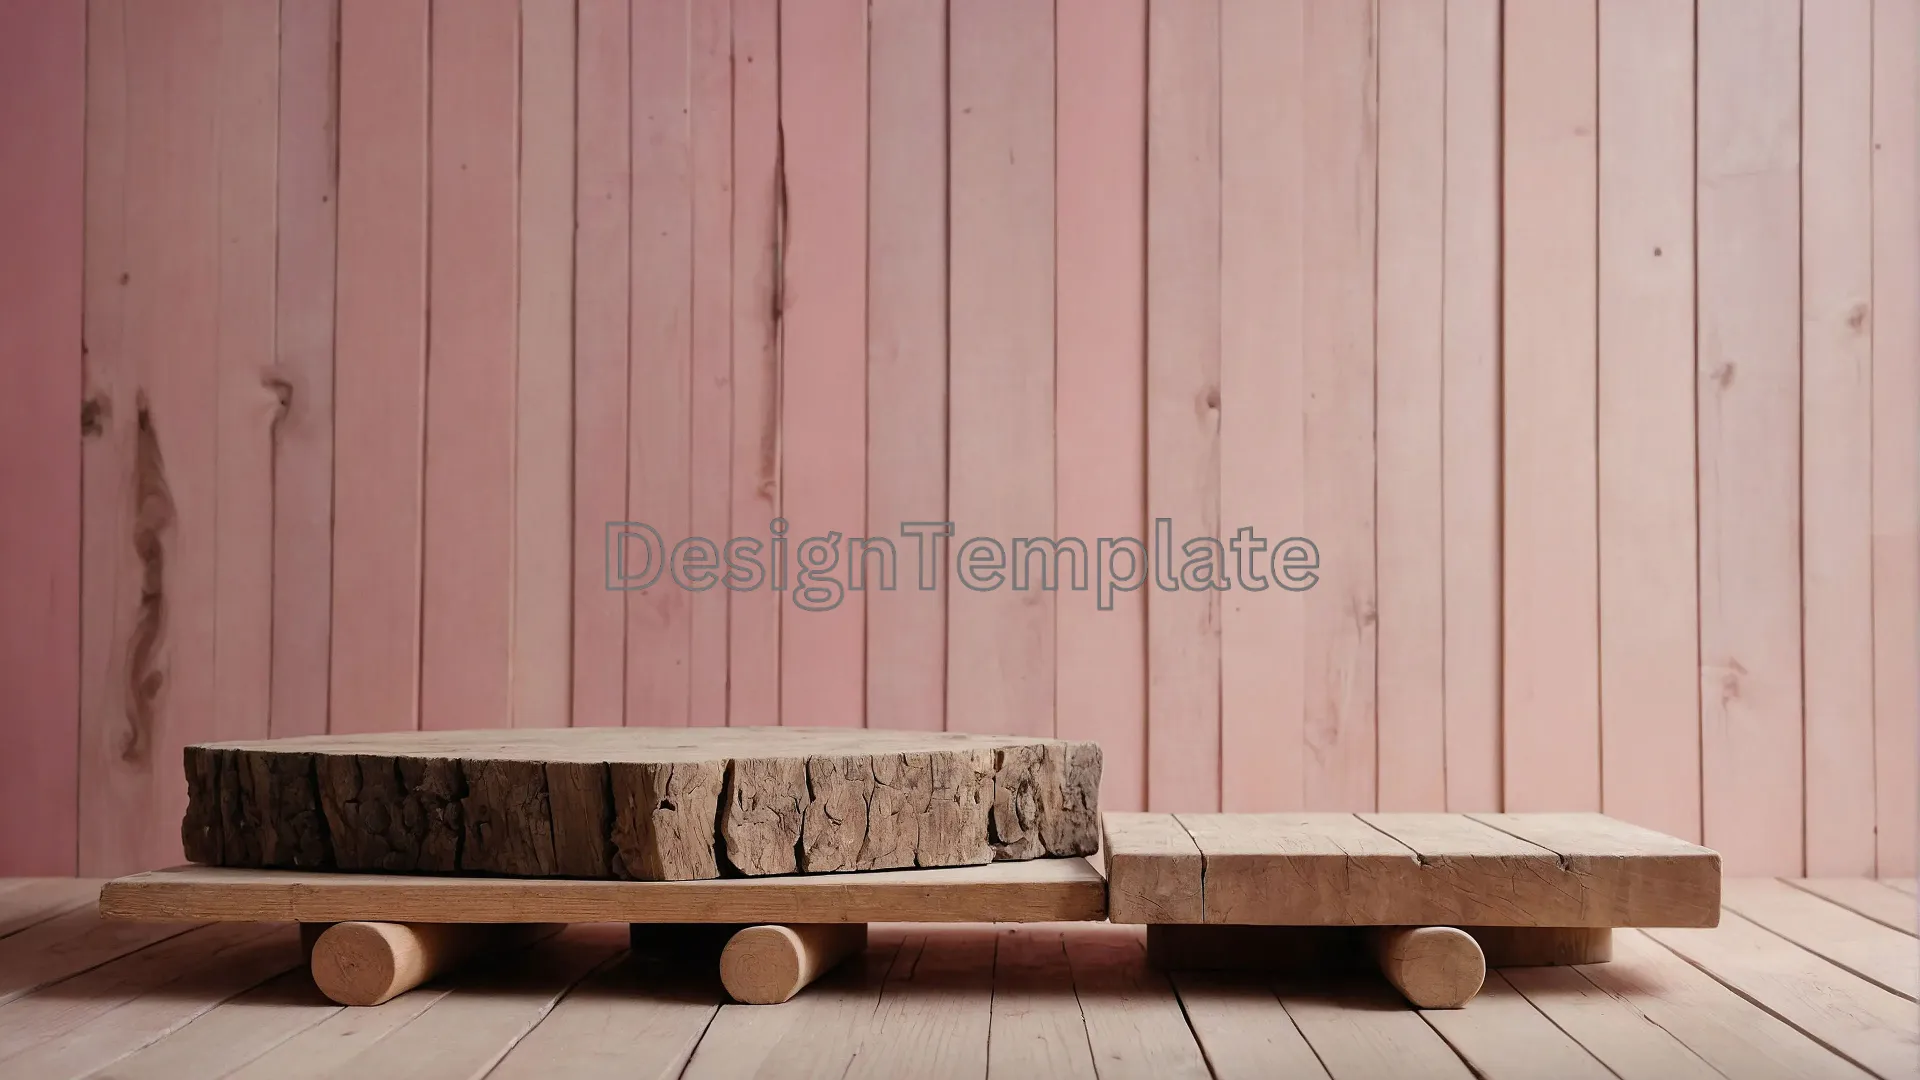 Rustic Wood Planks on Pink Pastel Wall Background Image